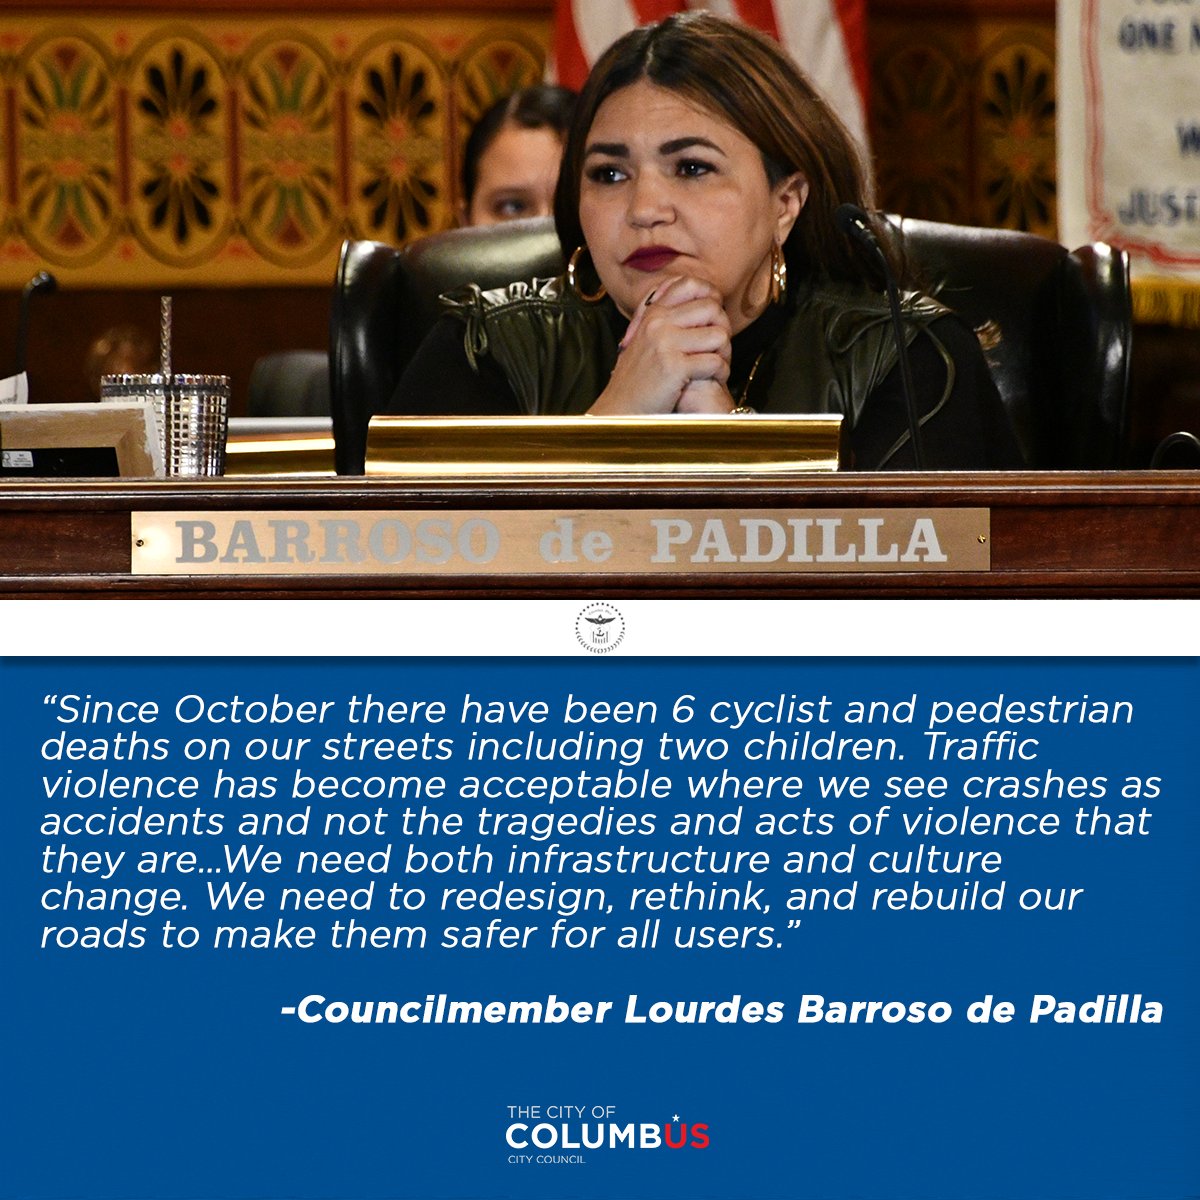 Since October there have been 6 cyclist and pedestrian deaths on our streets including two children. Traffic violence has become acceptable where we see crashes as accidents and not the tragedies and acts of violence that they are...We need both infrastructure and culture change. We need to redesign, rethink, and rebuild our roads to make them safer for all users. - quote from Councilmember Lourdes Barroso de Padilla, posted underneath a photo of her in the Council chambers, looking serious.